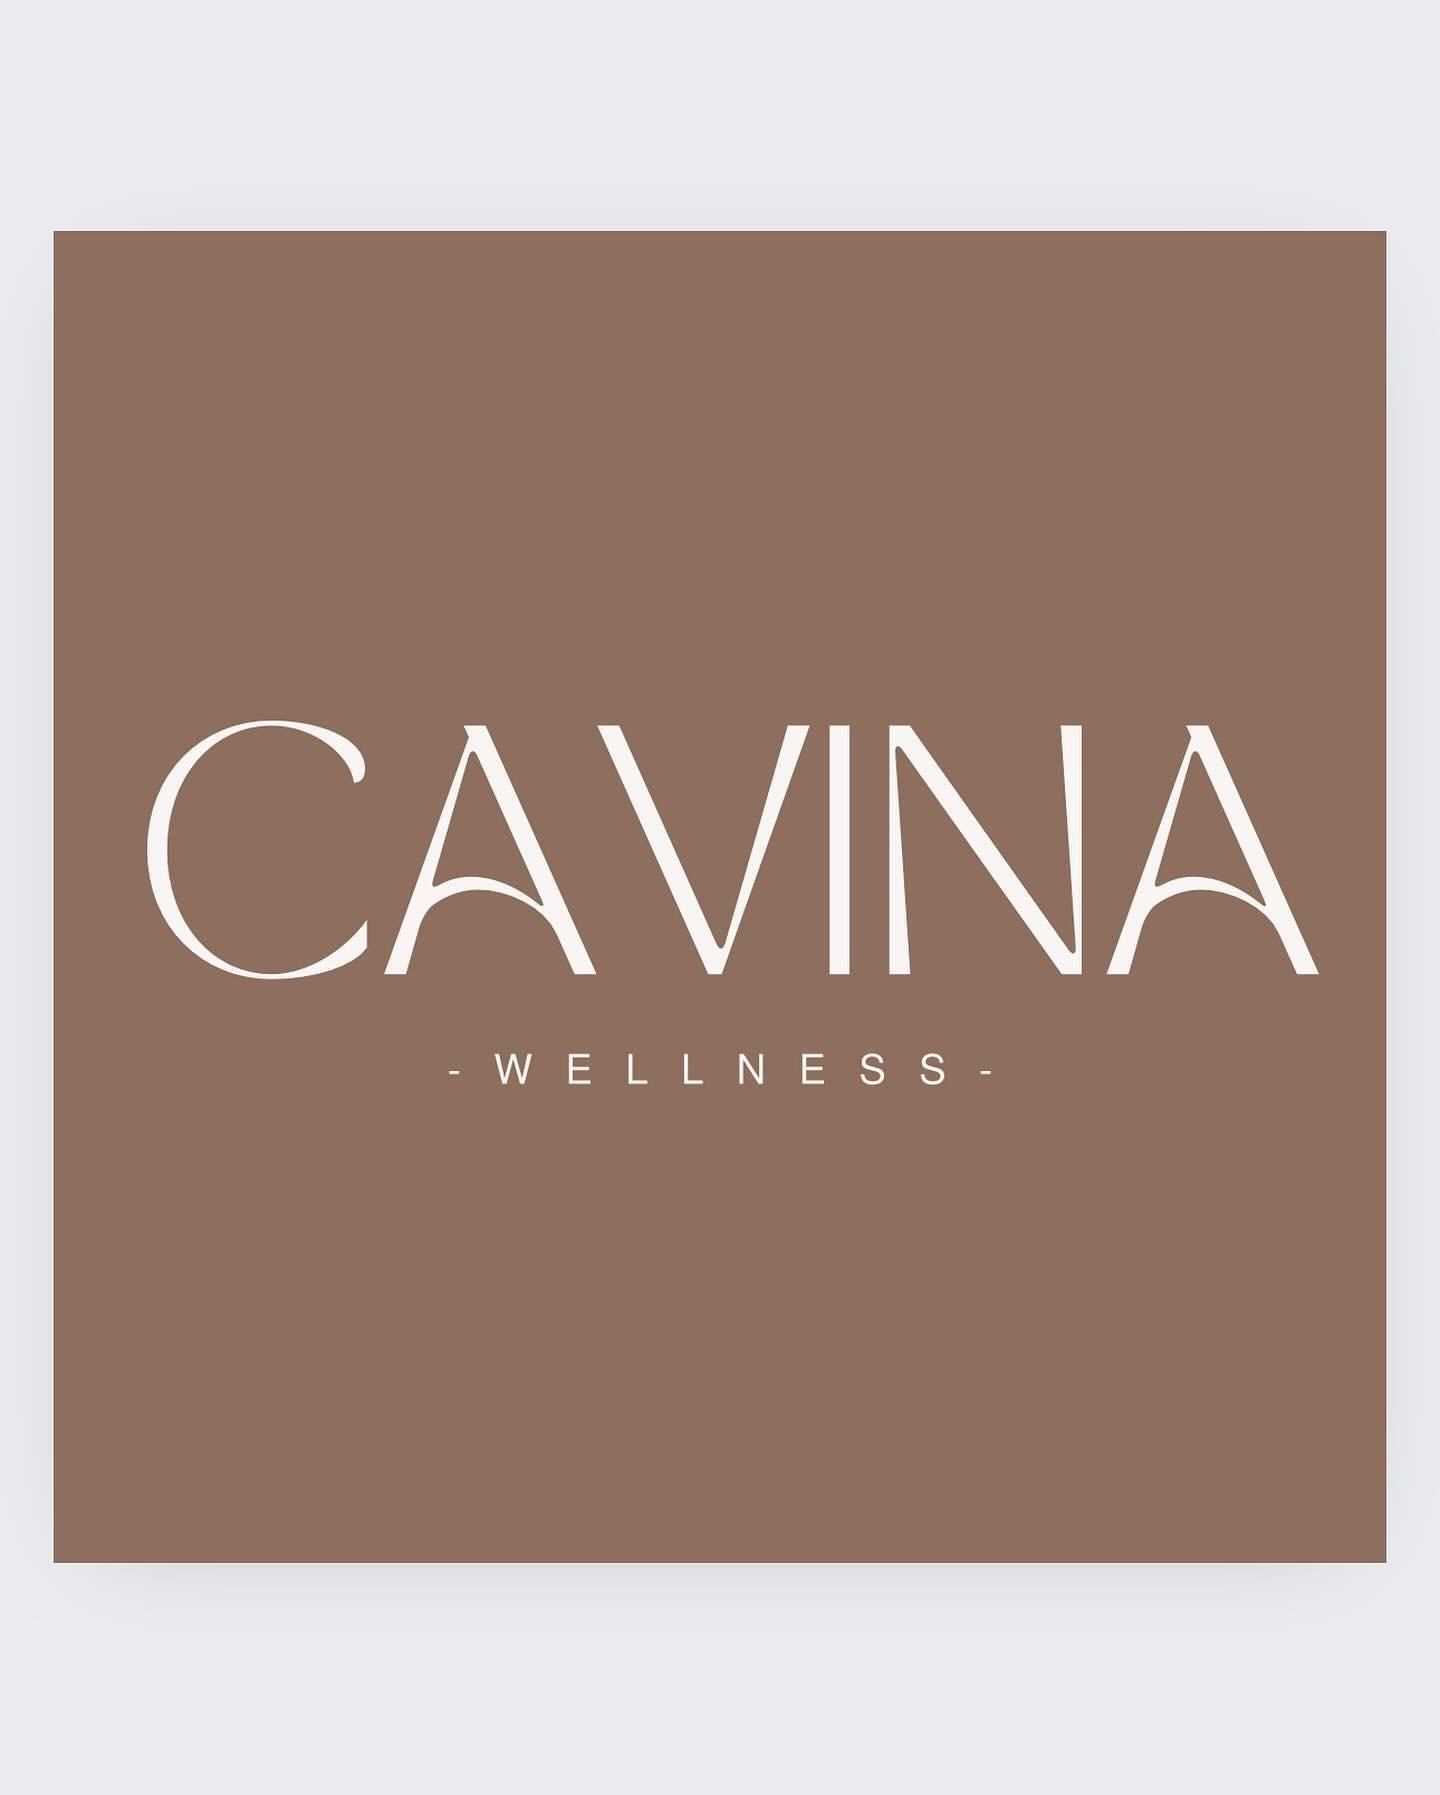 ✨ OUR NEW CAVINA WEBSITE IS LIVE 🥰✨

Step into our world of beauty, balance, and bliss at Cavina Wellness! We&rsquo;re thrilled to share that we&rsquo;re not just a med spa anymore; we&rsquo;re your destination for all things wellness💖

While we st